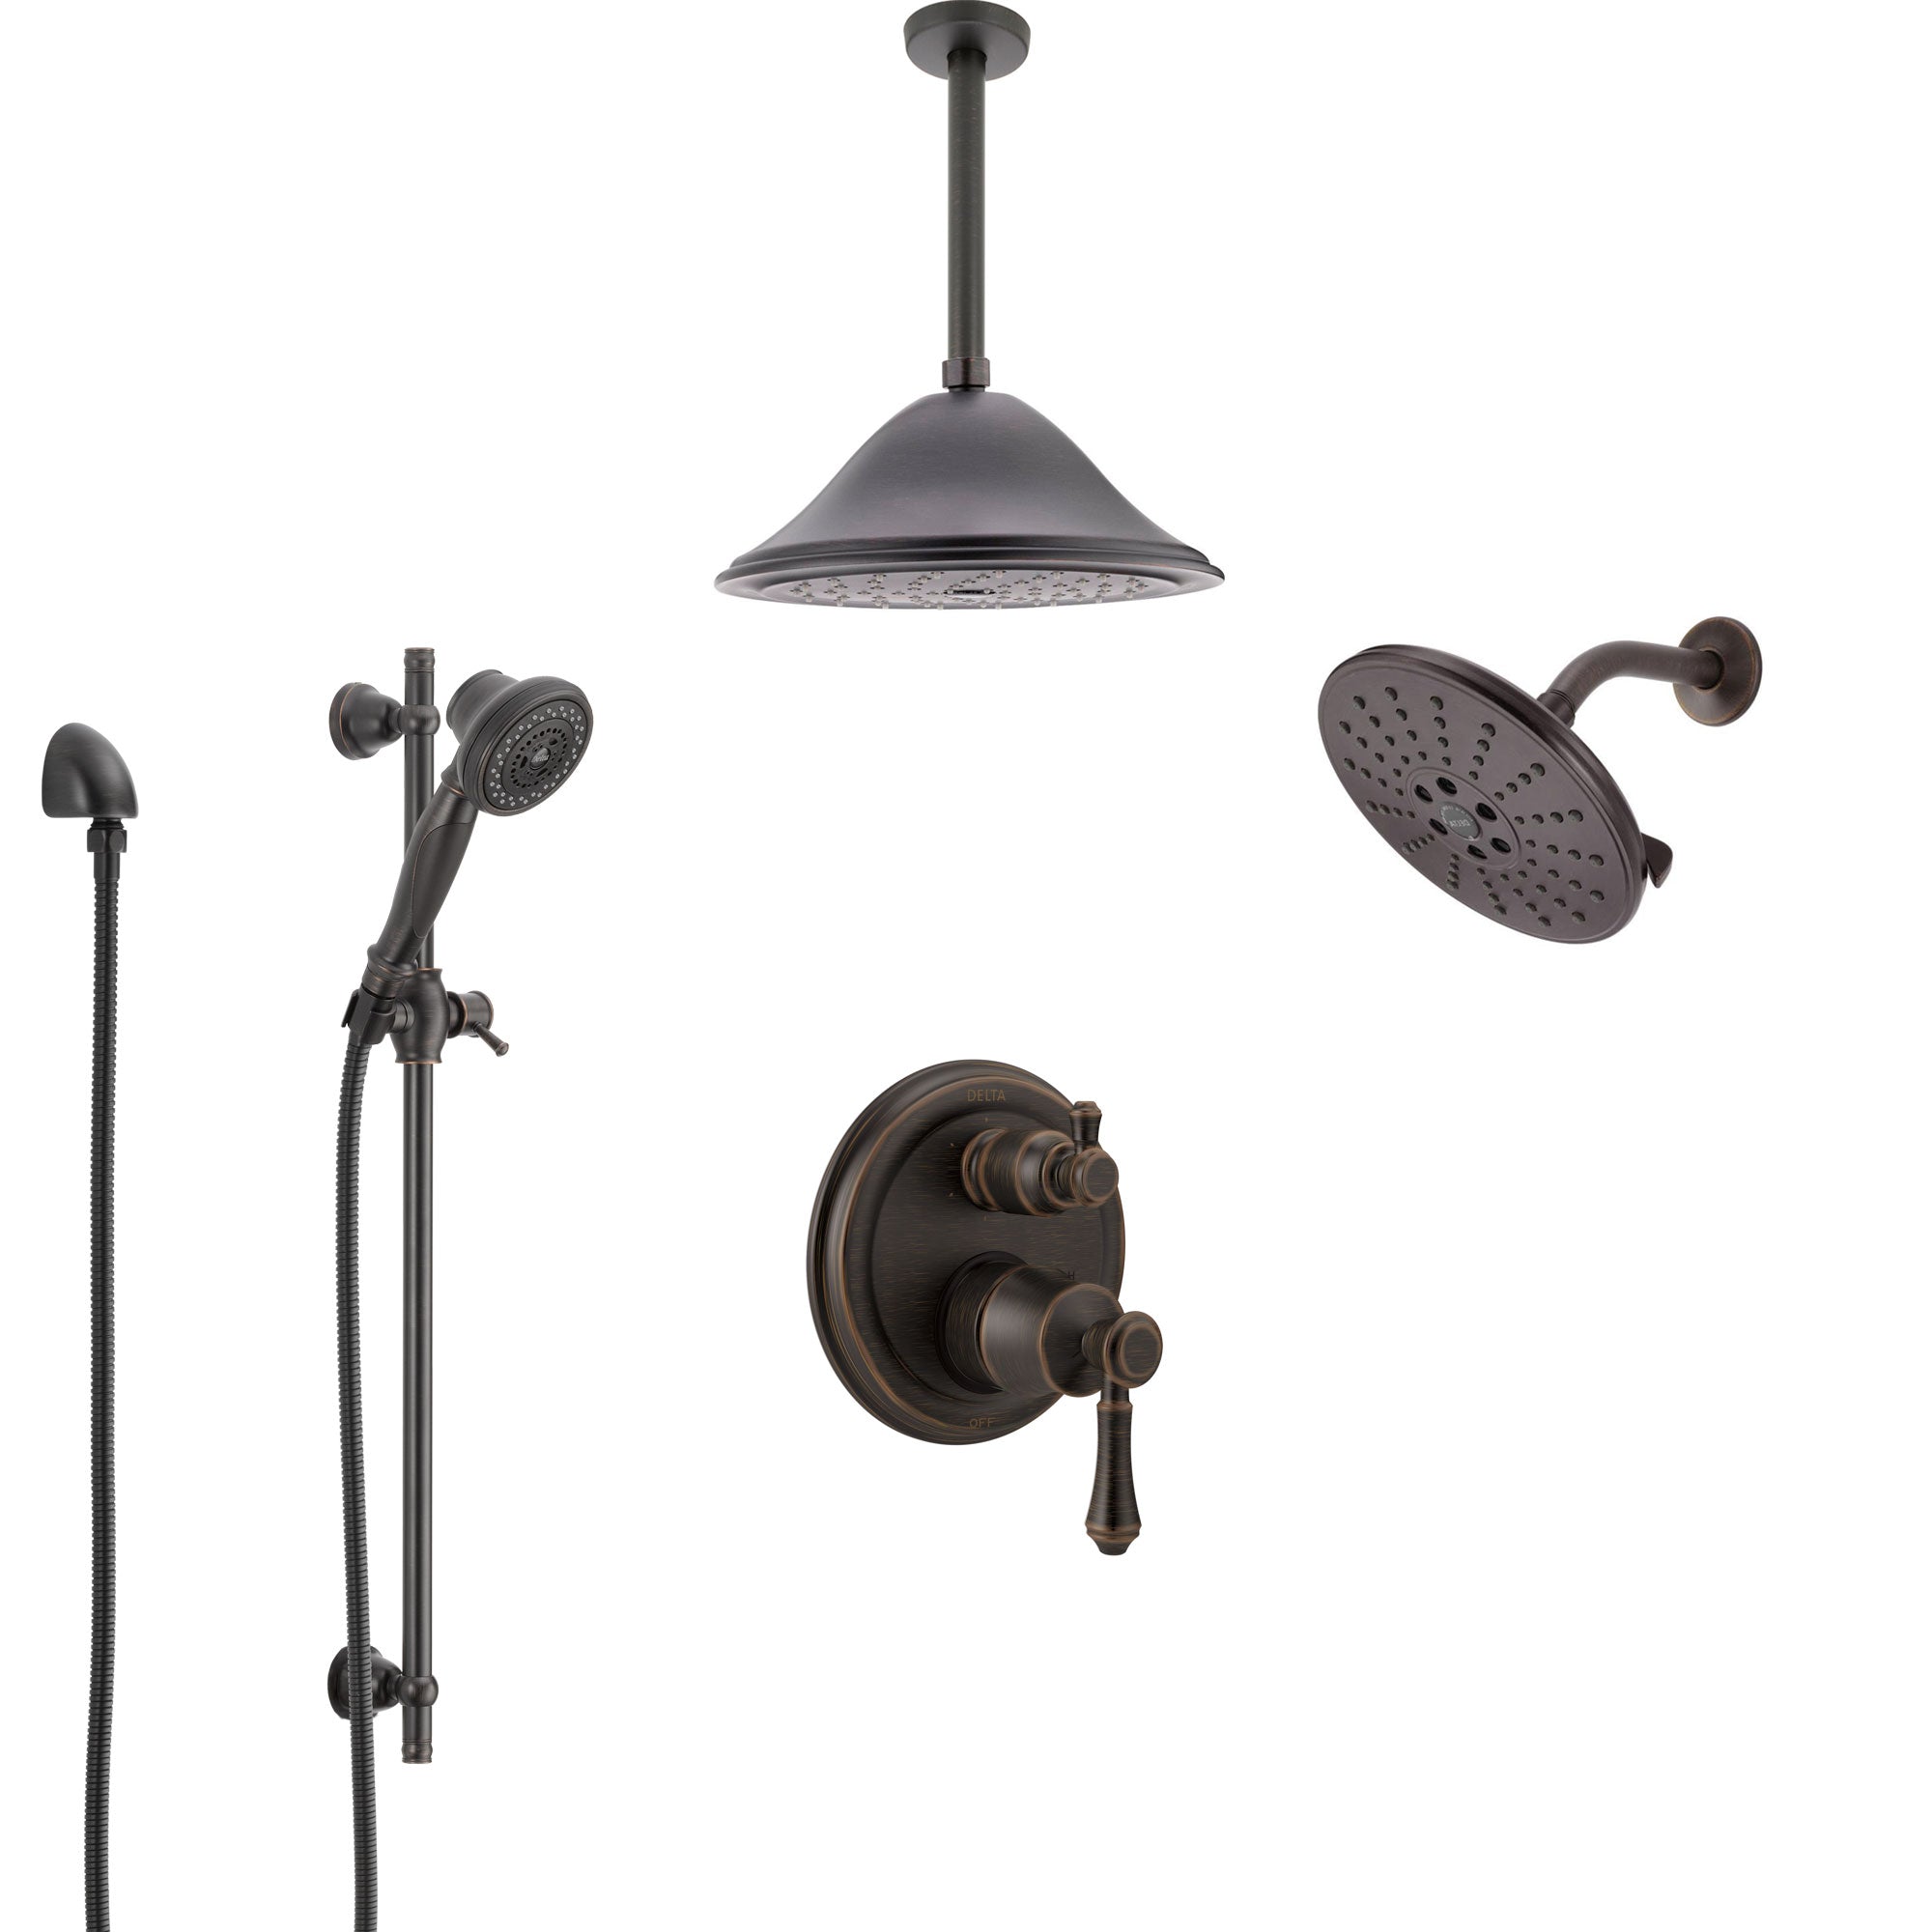 Delta Cassidy Venetian Bronze Shower System with Control Handle, Integrated Diverter, Showerhead, Ceiling Showerhead, and Hand Shower SS24997RB10